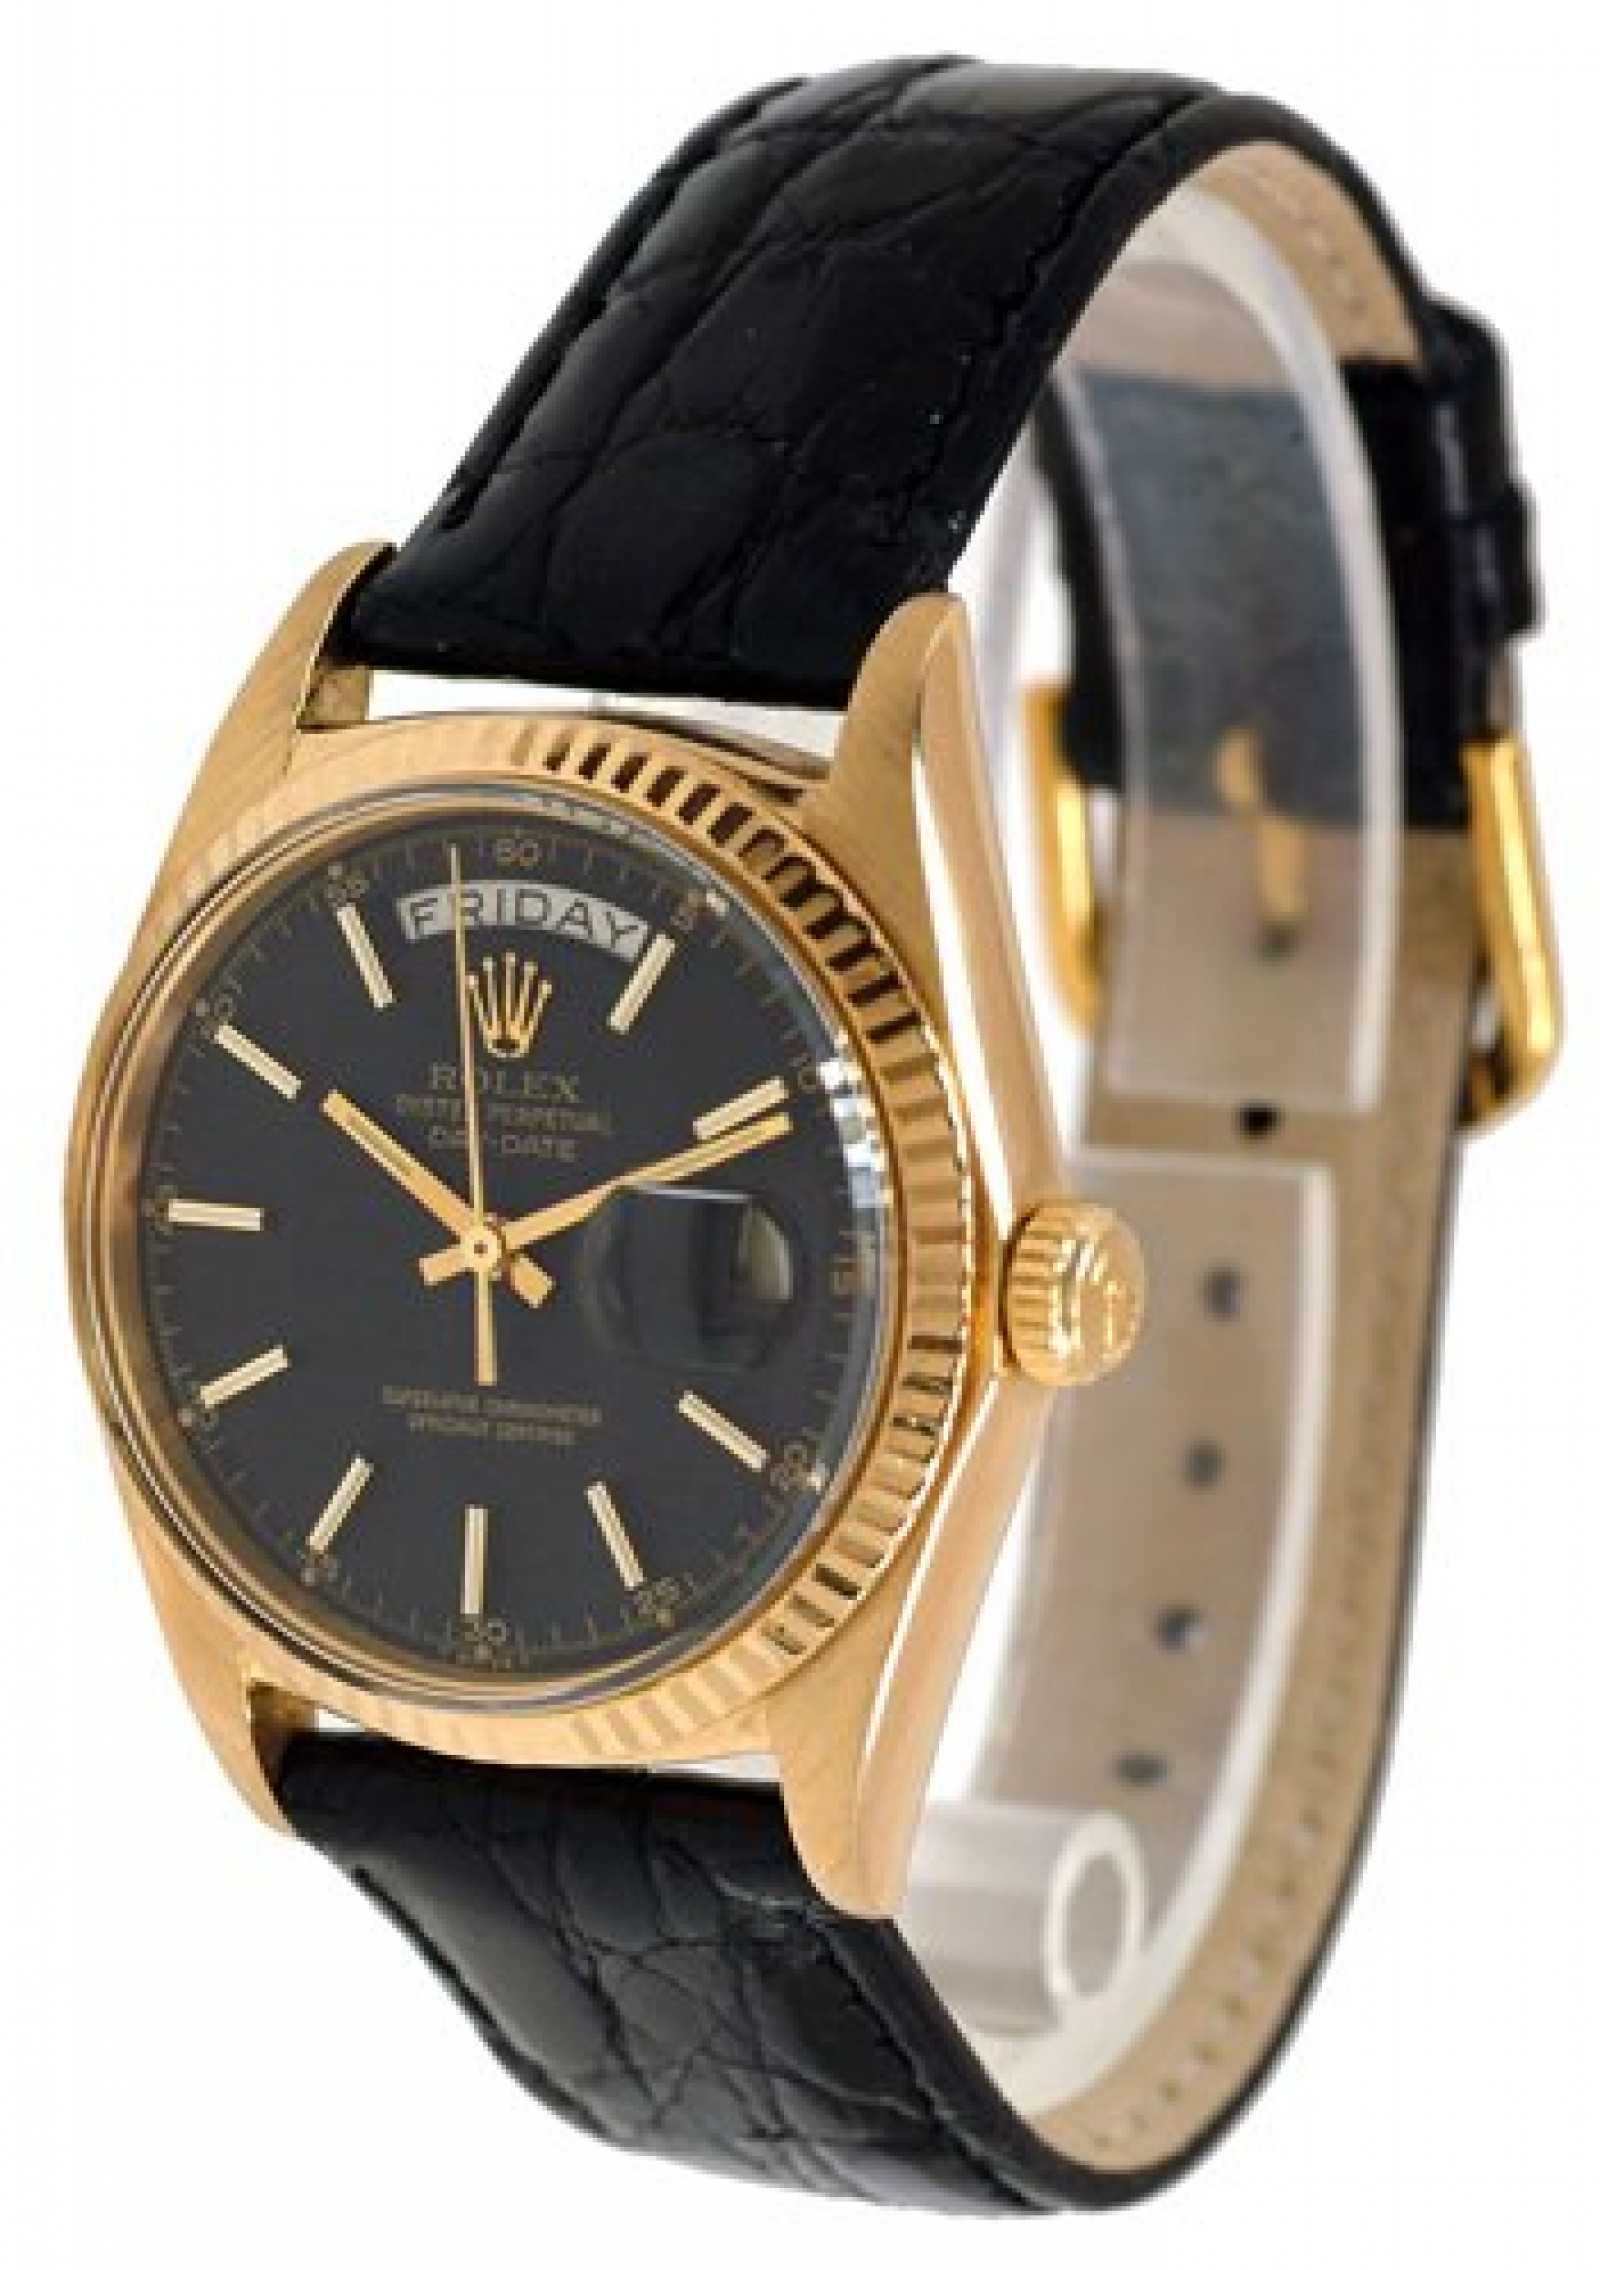 Vintage Rolex Day-Date 1803 Gold Year 1969 with Black Dial 1969